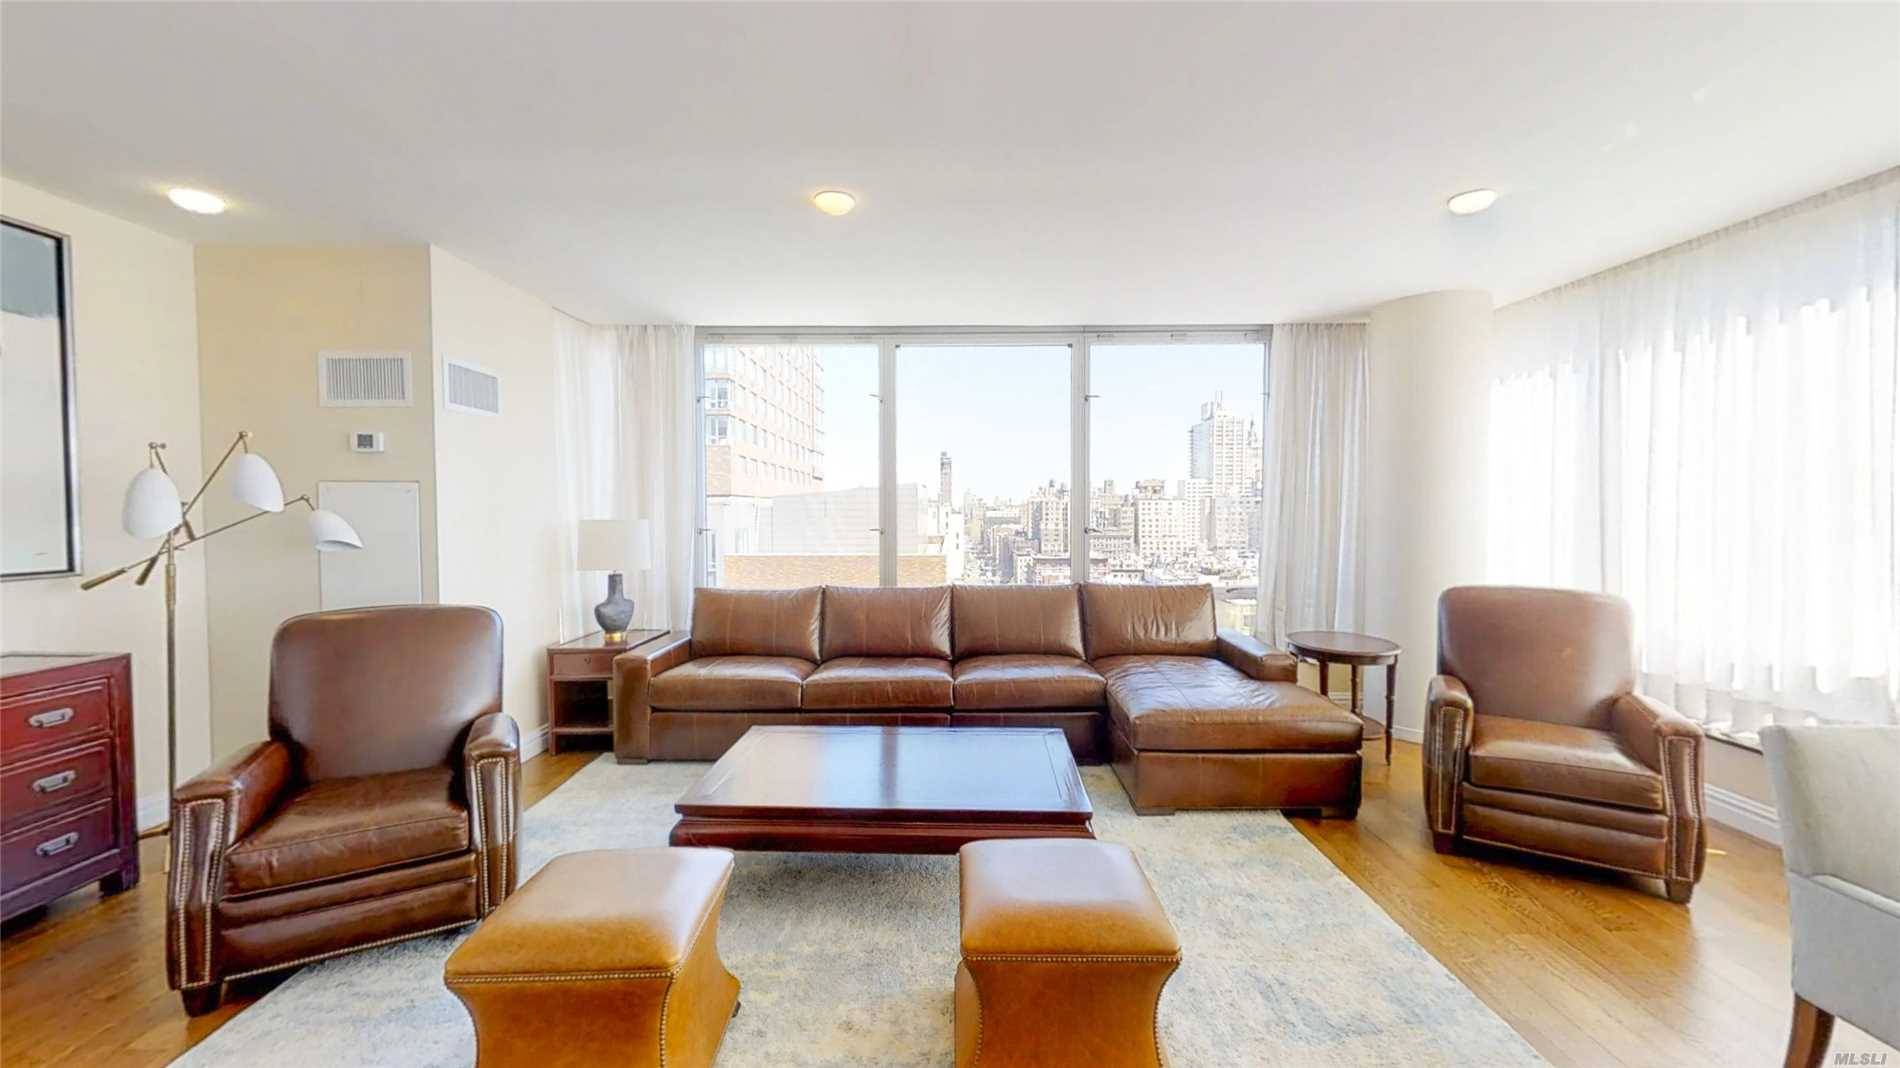 Luxury condo in the heart of Manhattan, just steps away from the Central Park.